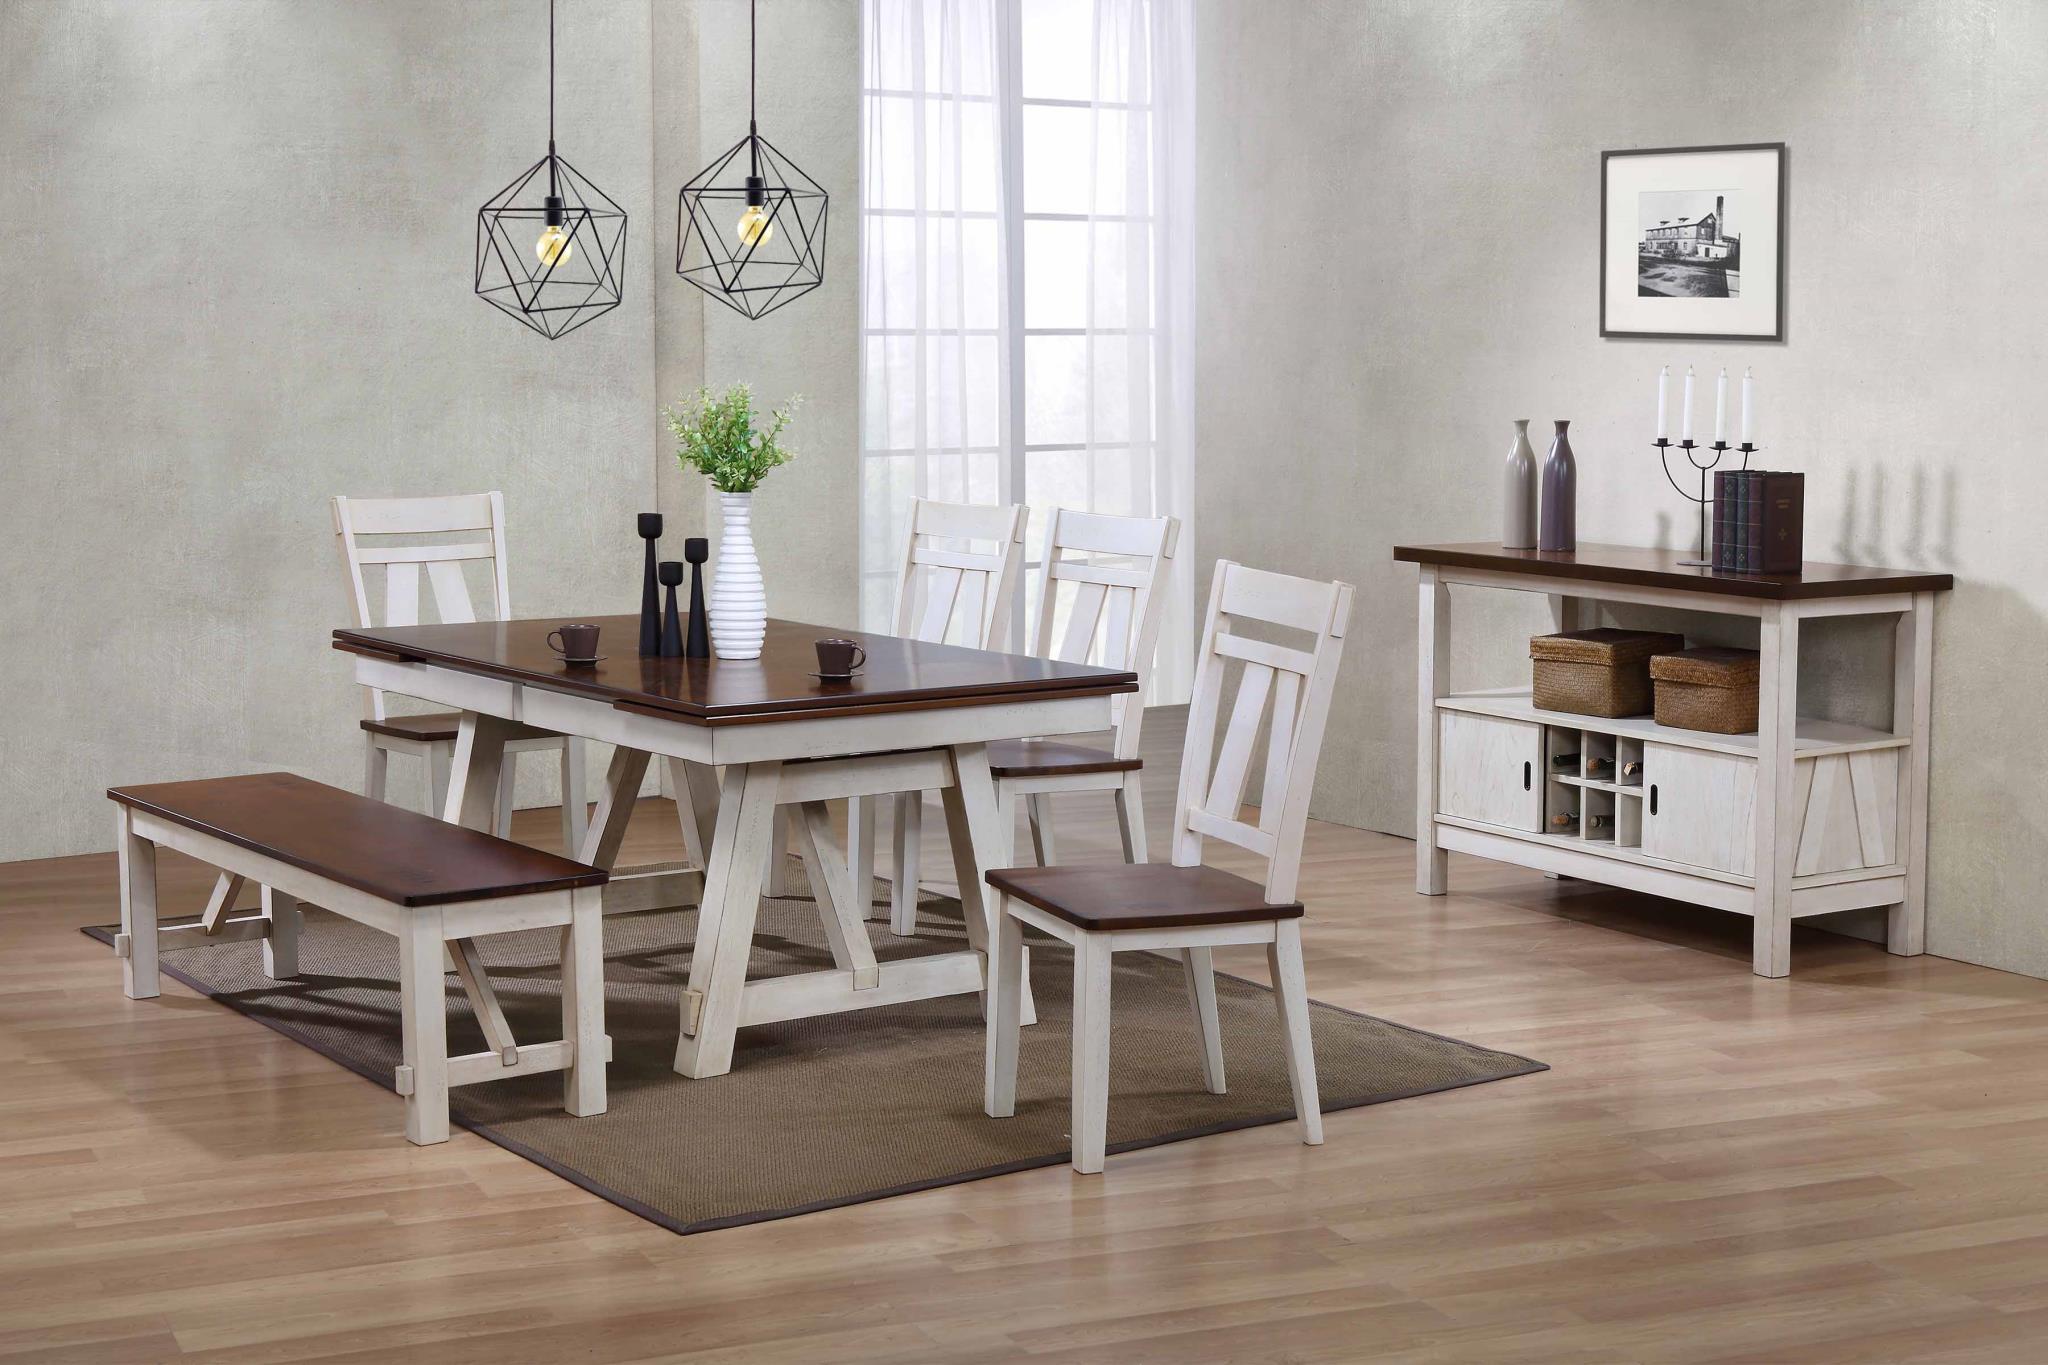 Rustic, Farmhouse Dining Room Set Winslow 5636-8pcs in Cream, Brown 